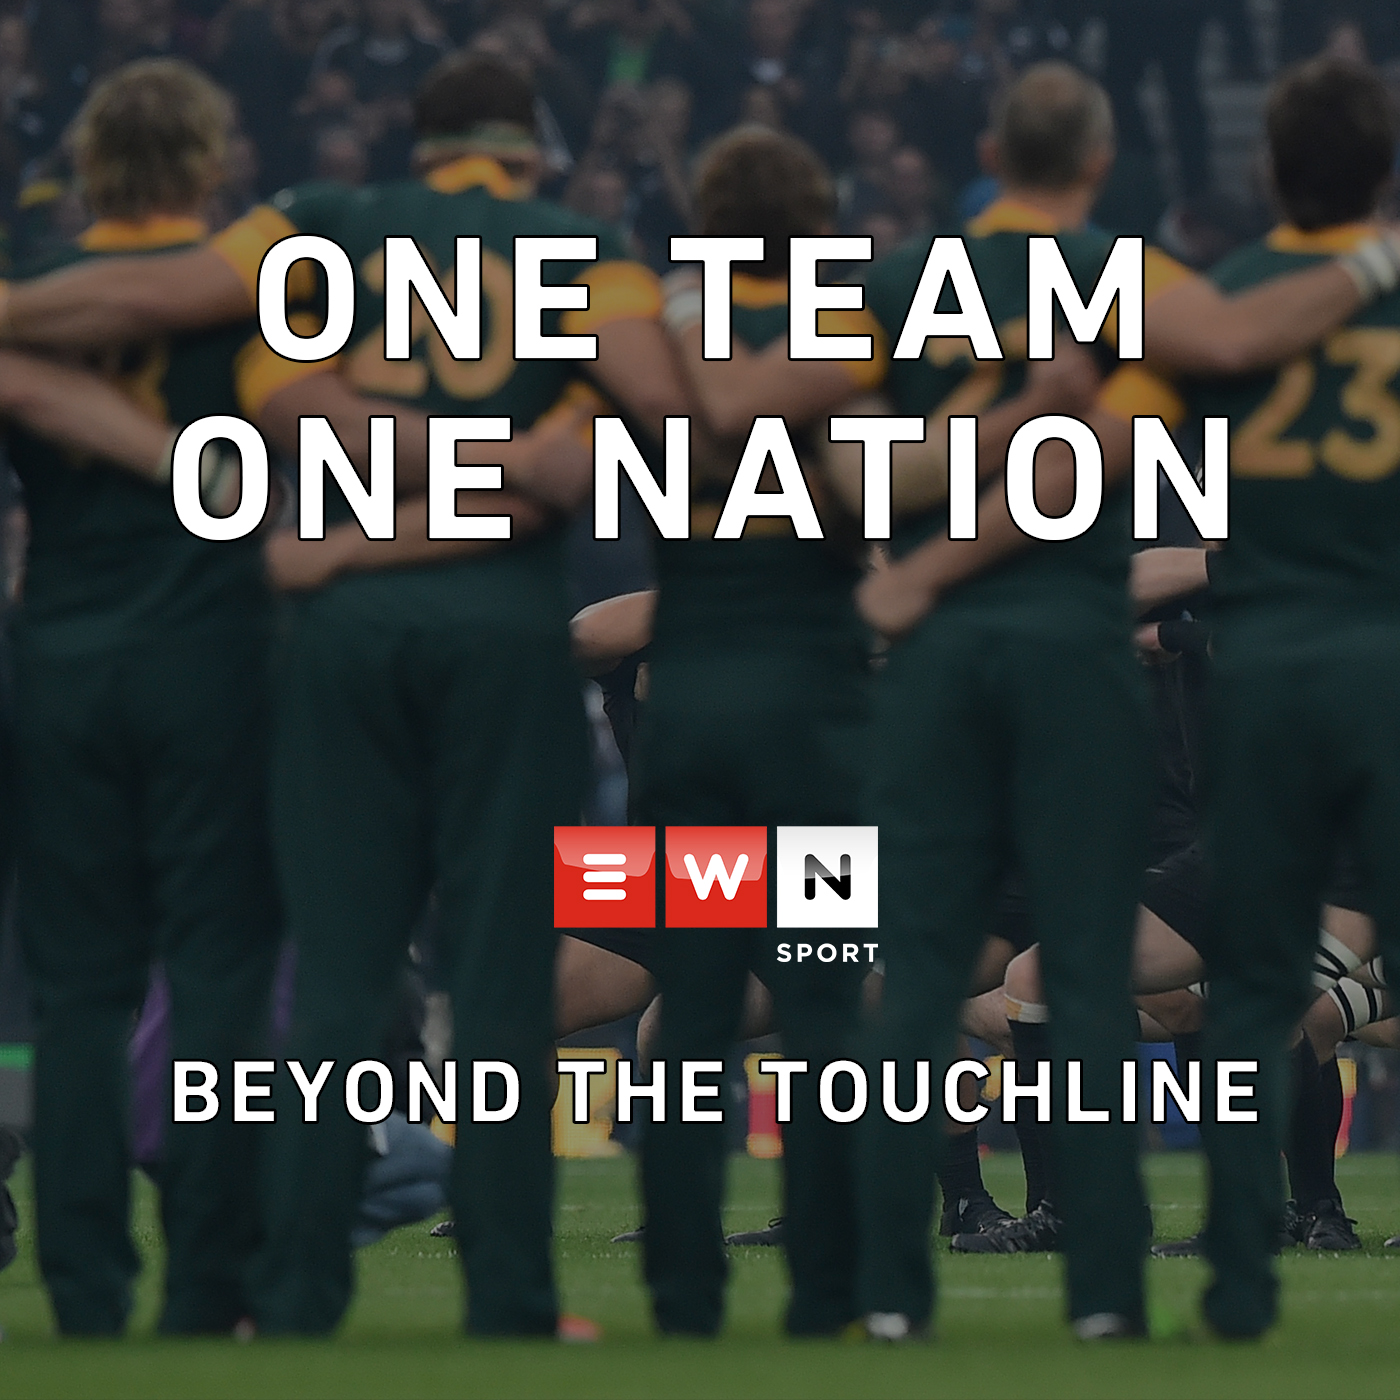 One team One nation